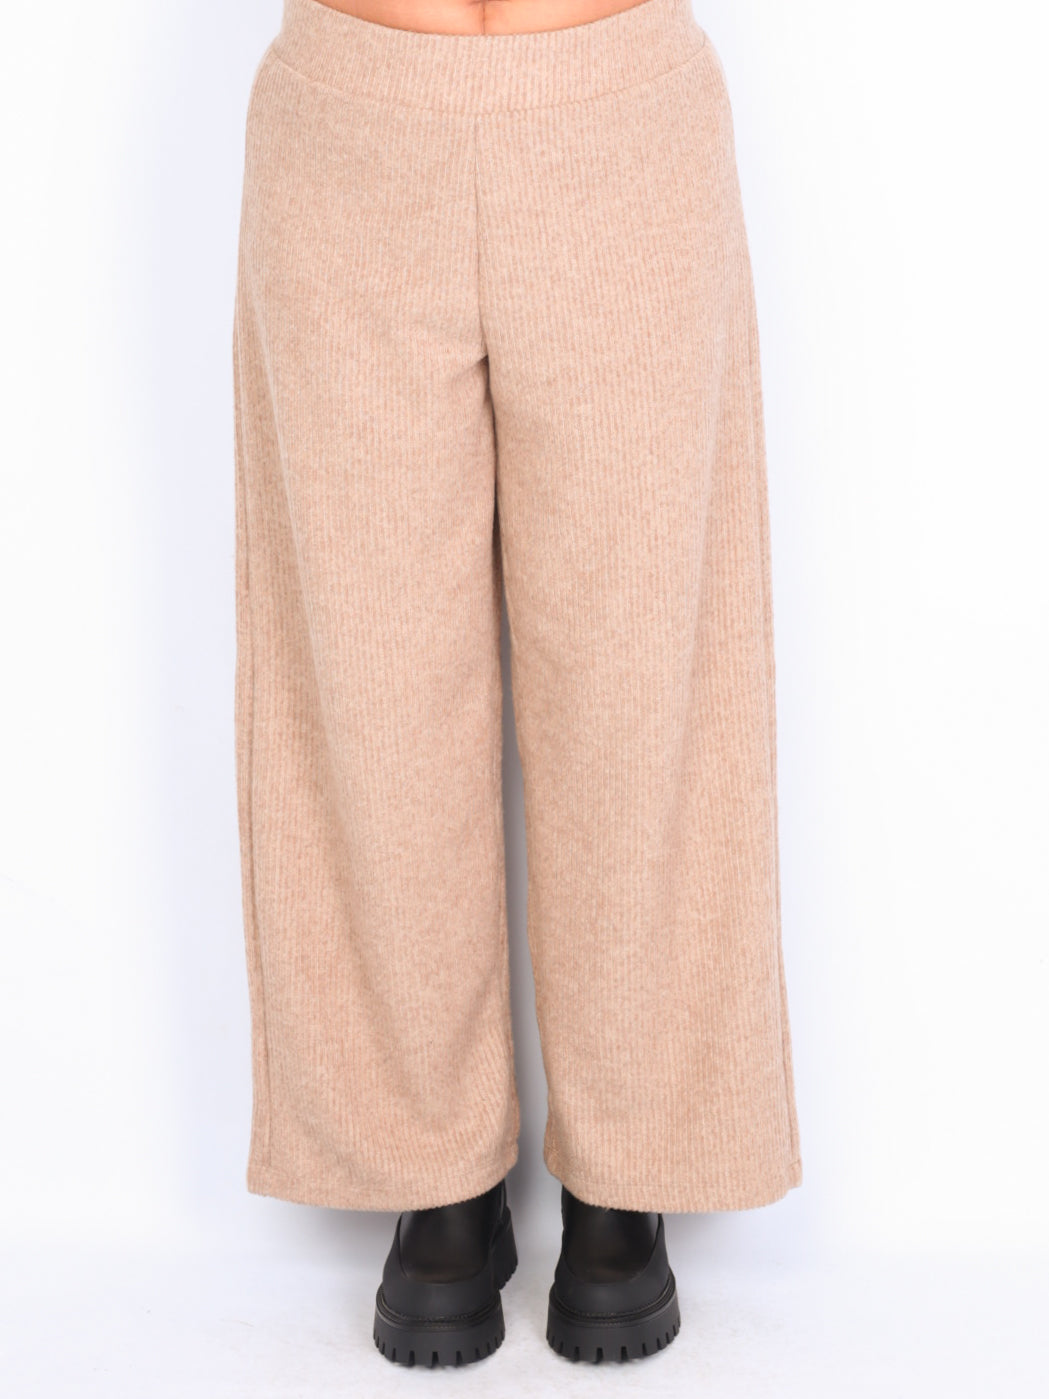 Soyaconcept ribbed trousers with elastic waist beige